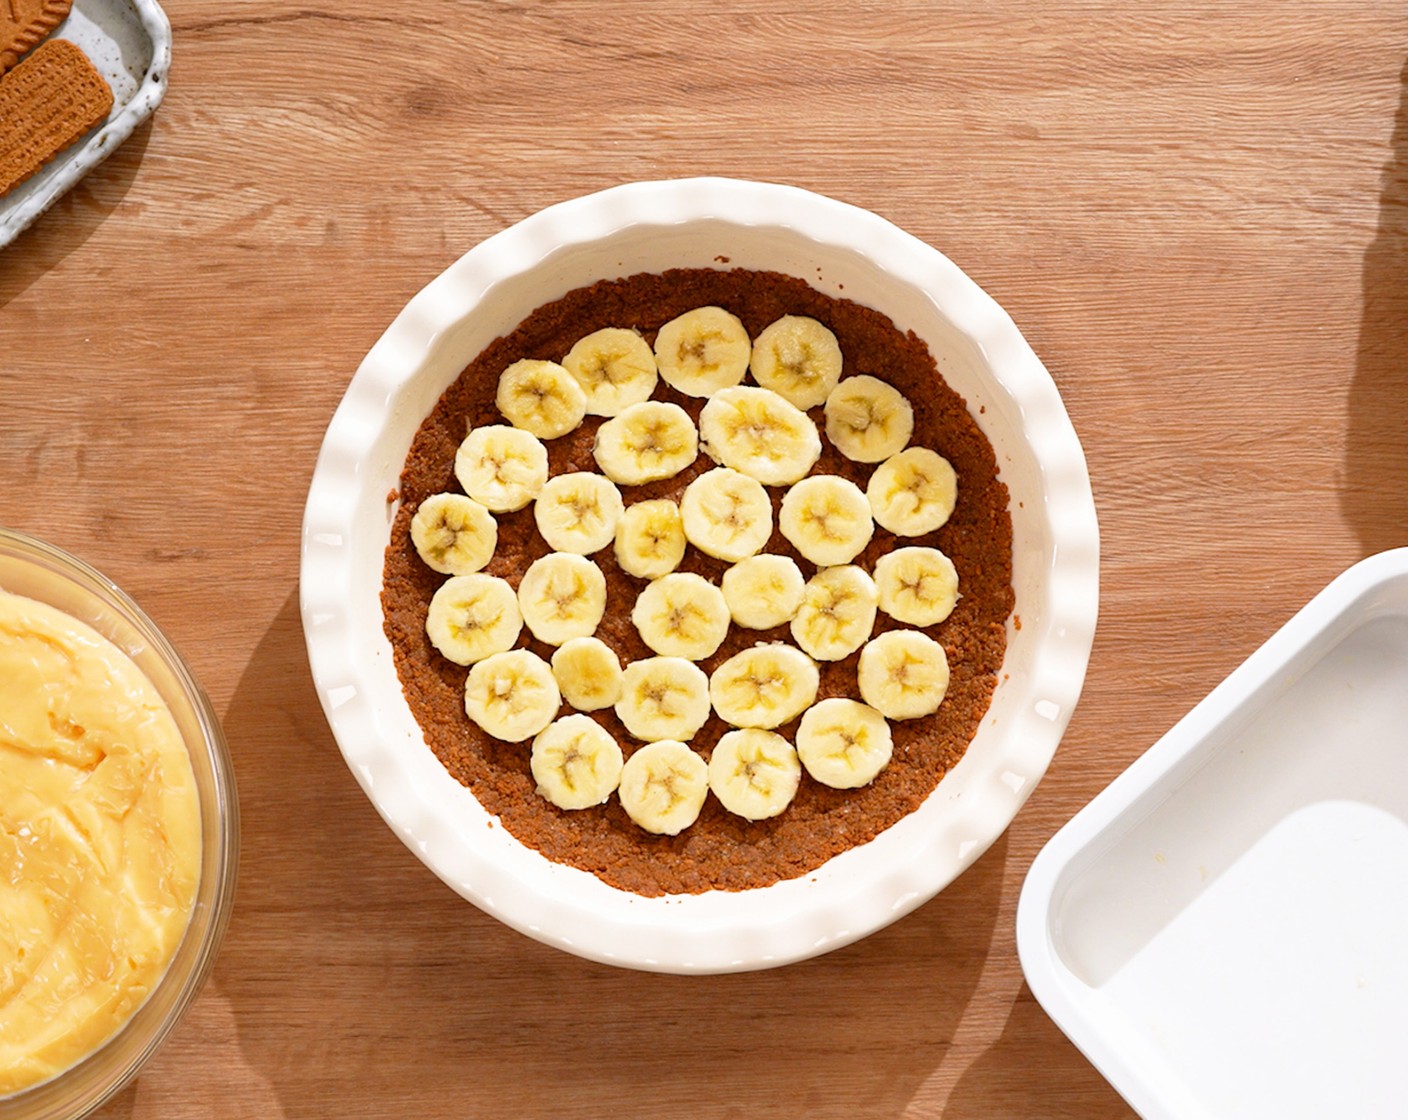 step 10 To assemble the pie, first arrange about ⅔ of the Bananas (3) over the crust. Then spread the filling on top of the banana slices in an even layer. Refrigerate until the filling is cooled completely, about 20 minutes.